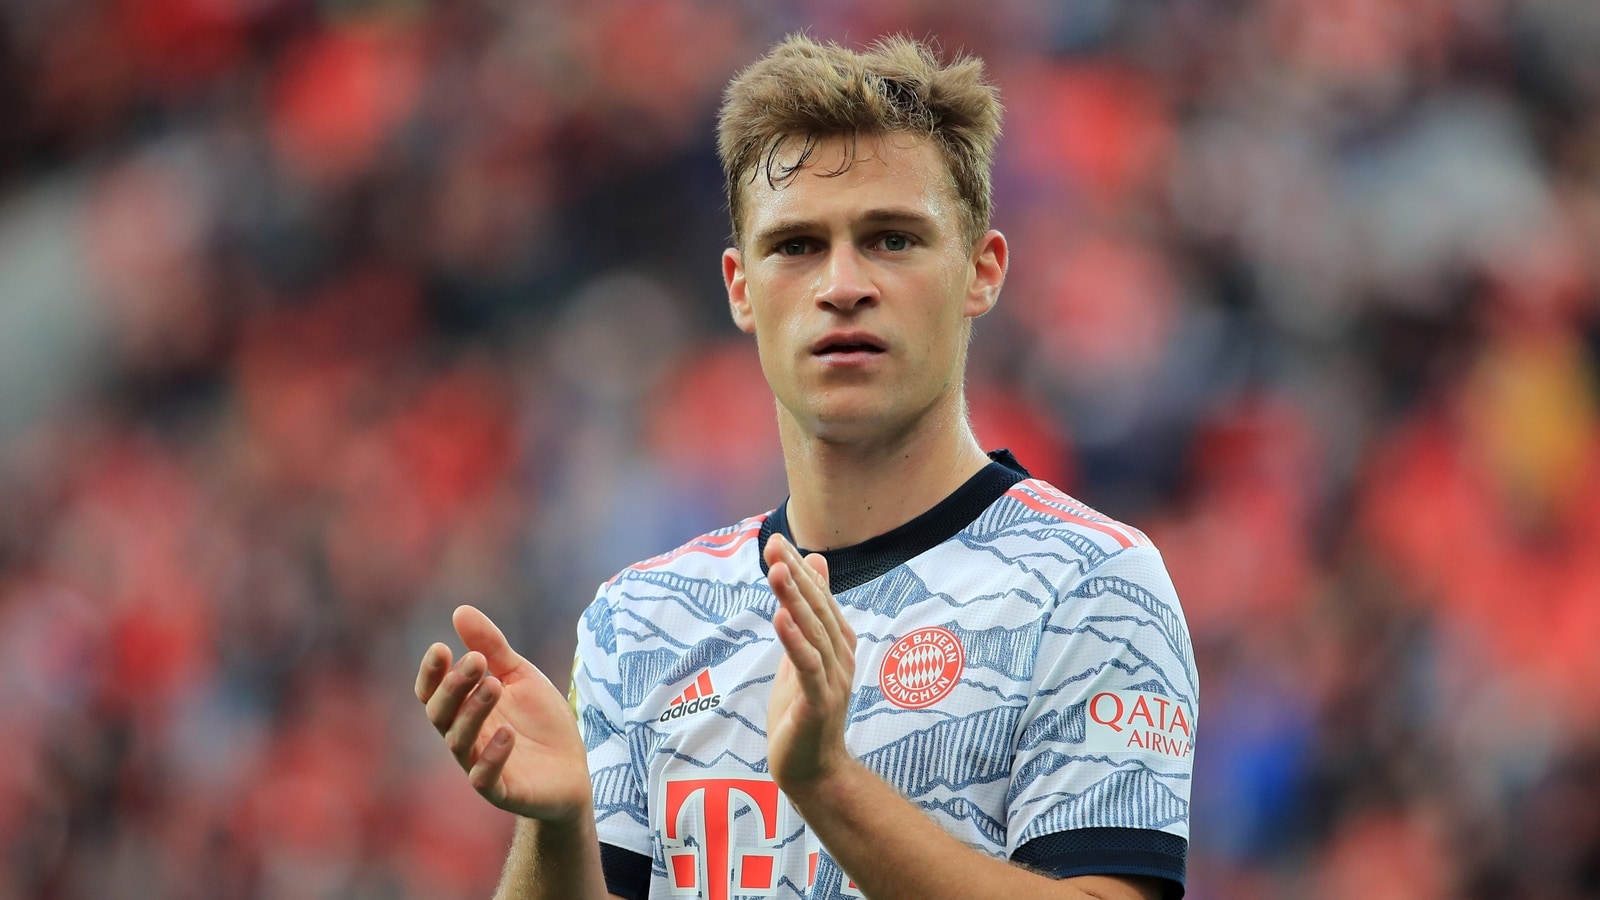 Bayern's Joshua Kimmich regrets being undecided about vaccine for so long